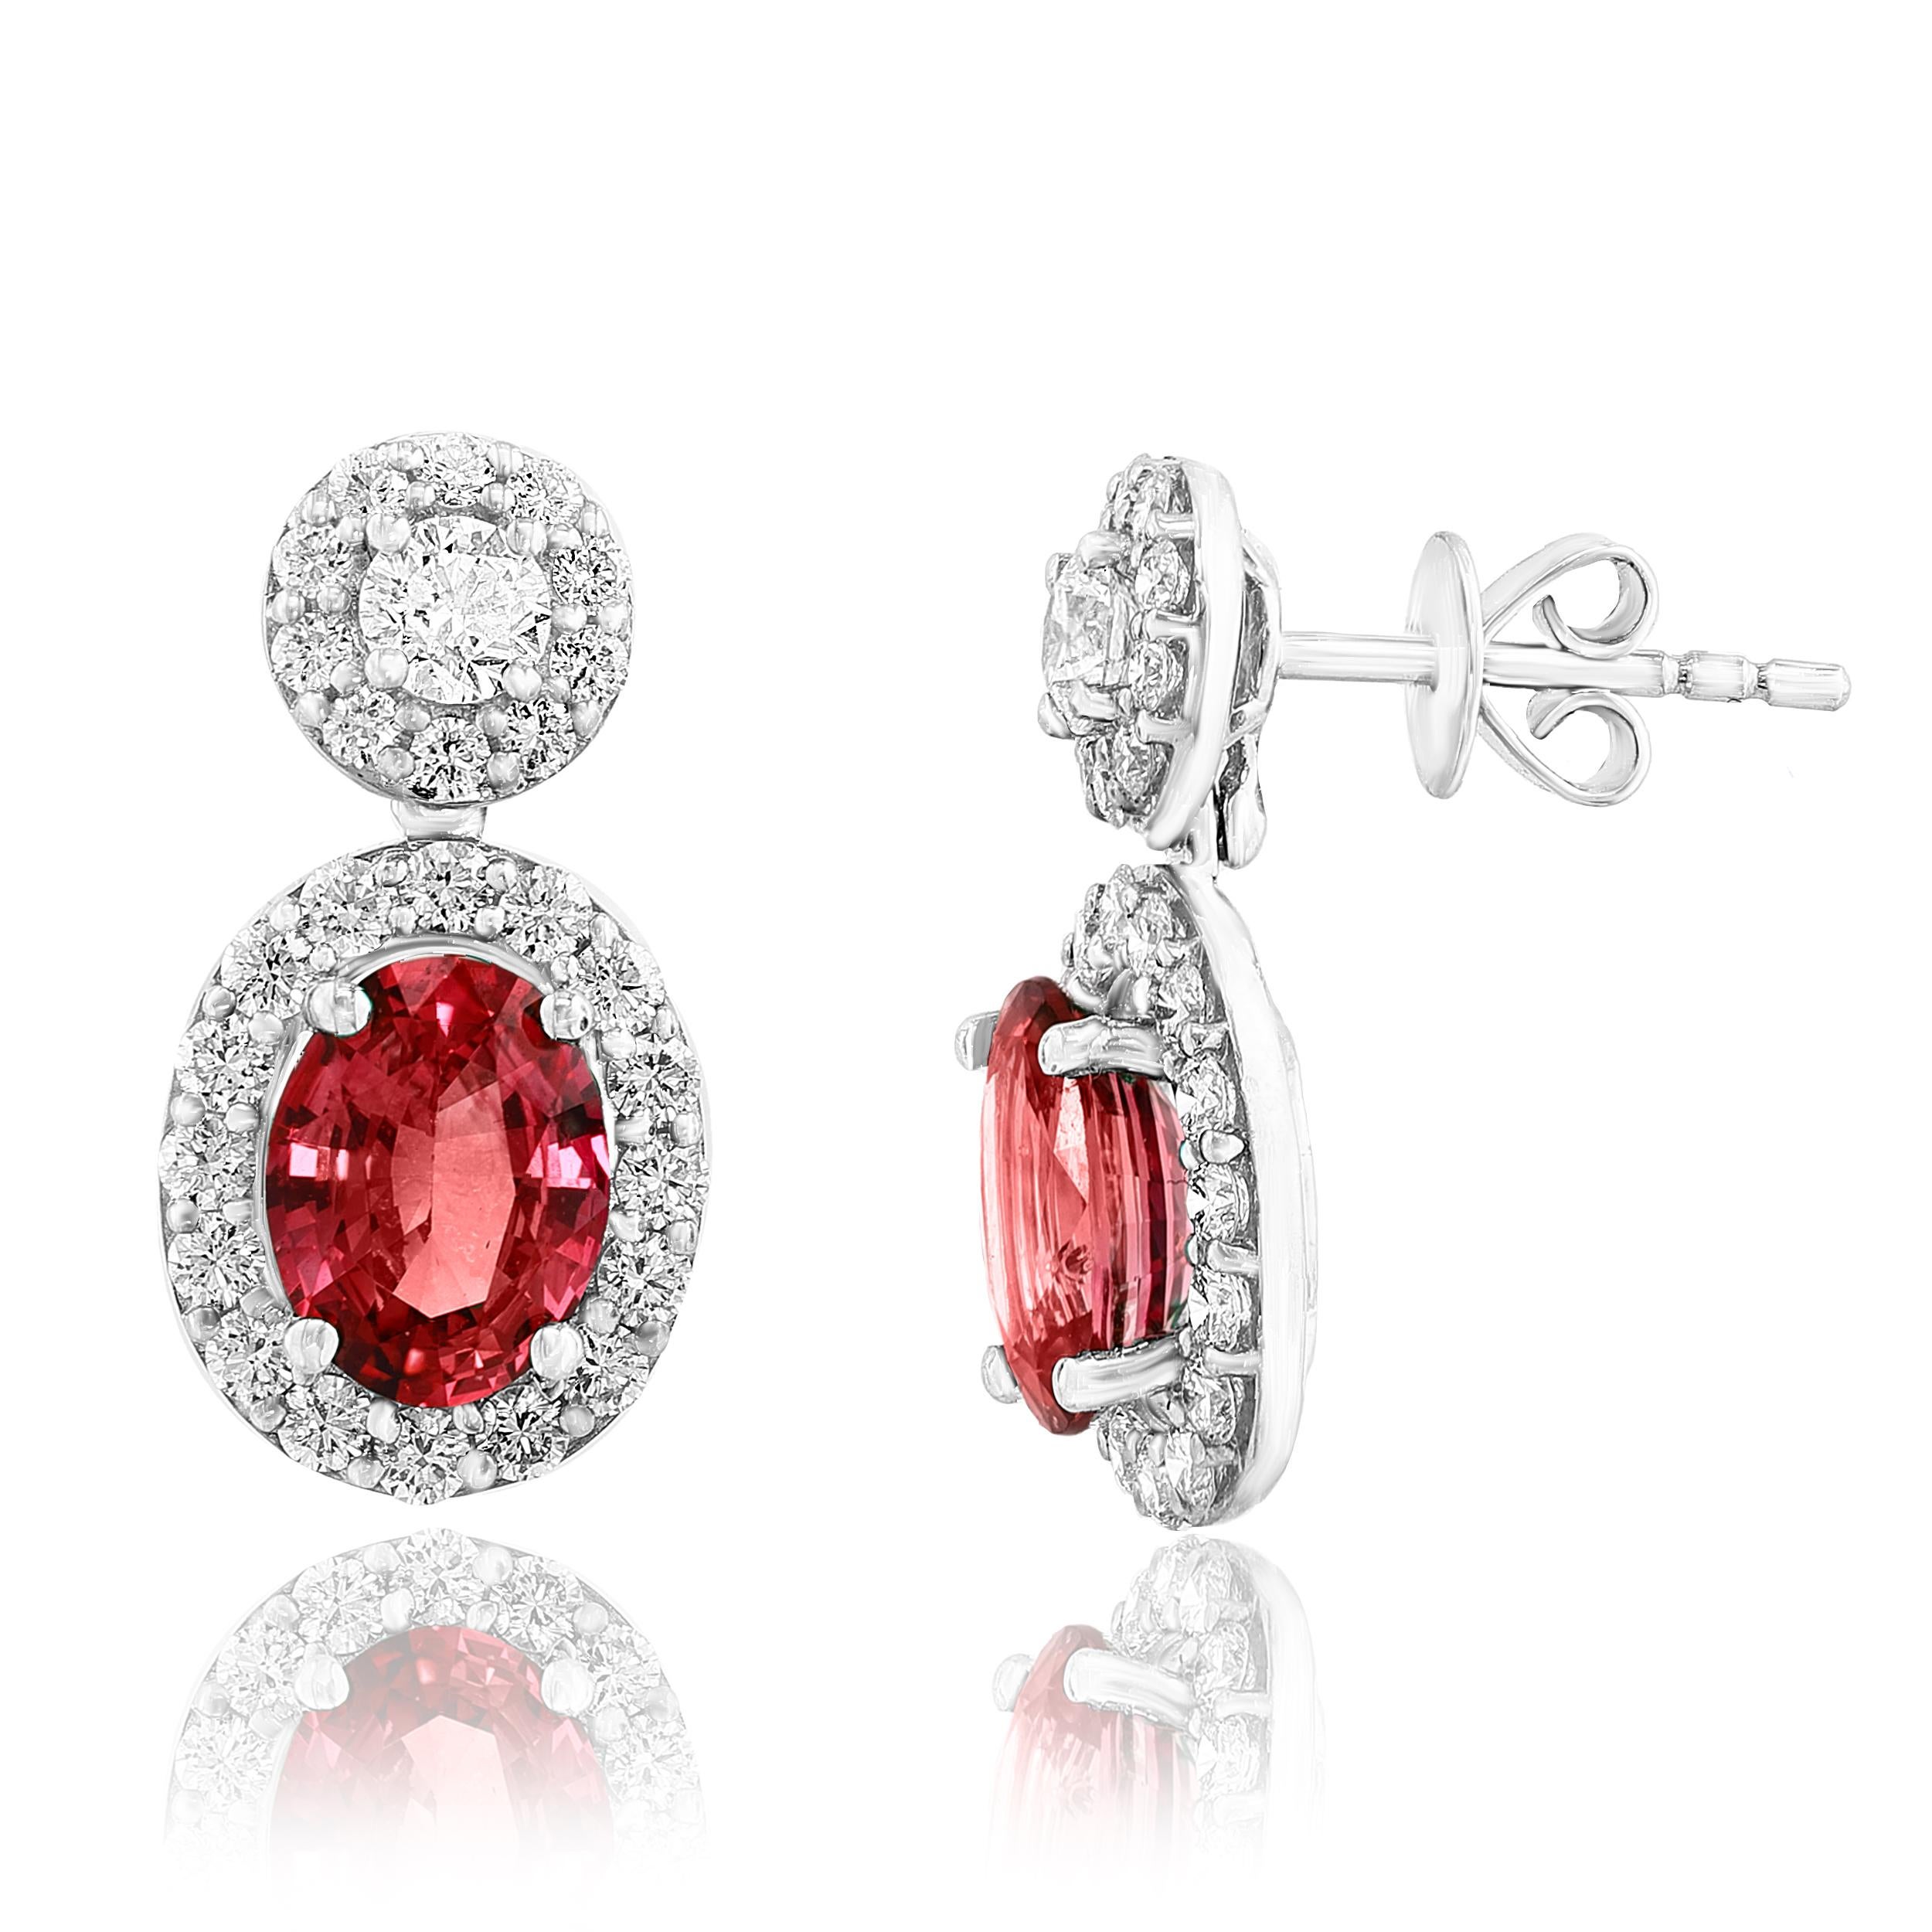 A beautiful and chic pair of drop earrings showcasing brilliant-cut diamonds, and oval-shaped Red Rubies set in an intricate and stylish design. 2  Diamonds on the top weigh 0.36 carats in total.  2  Blue sapphires weigh 1.29 carats in total. Made